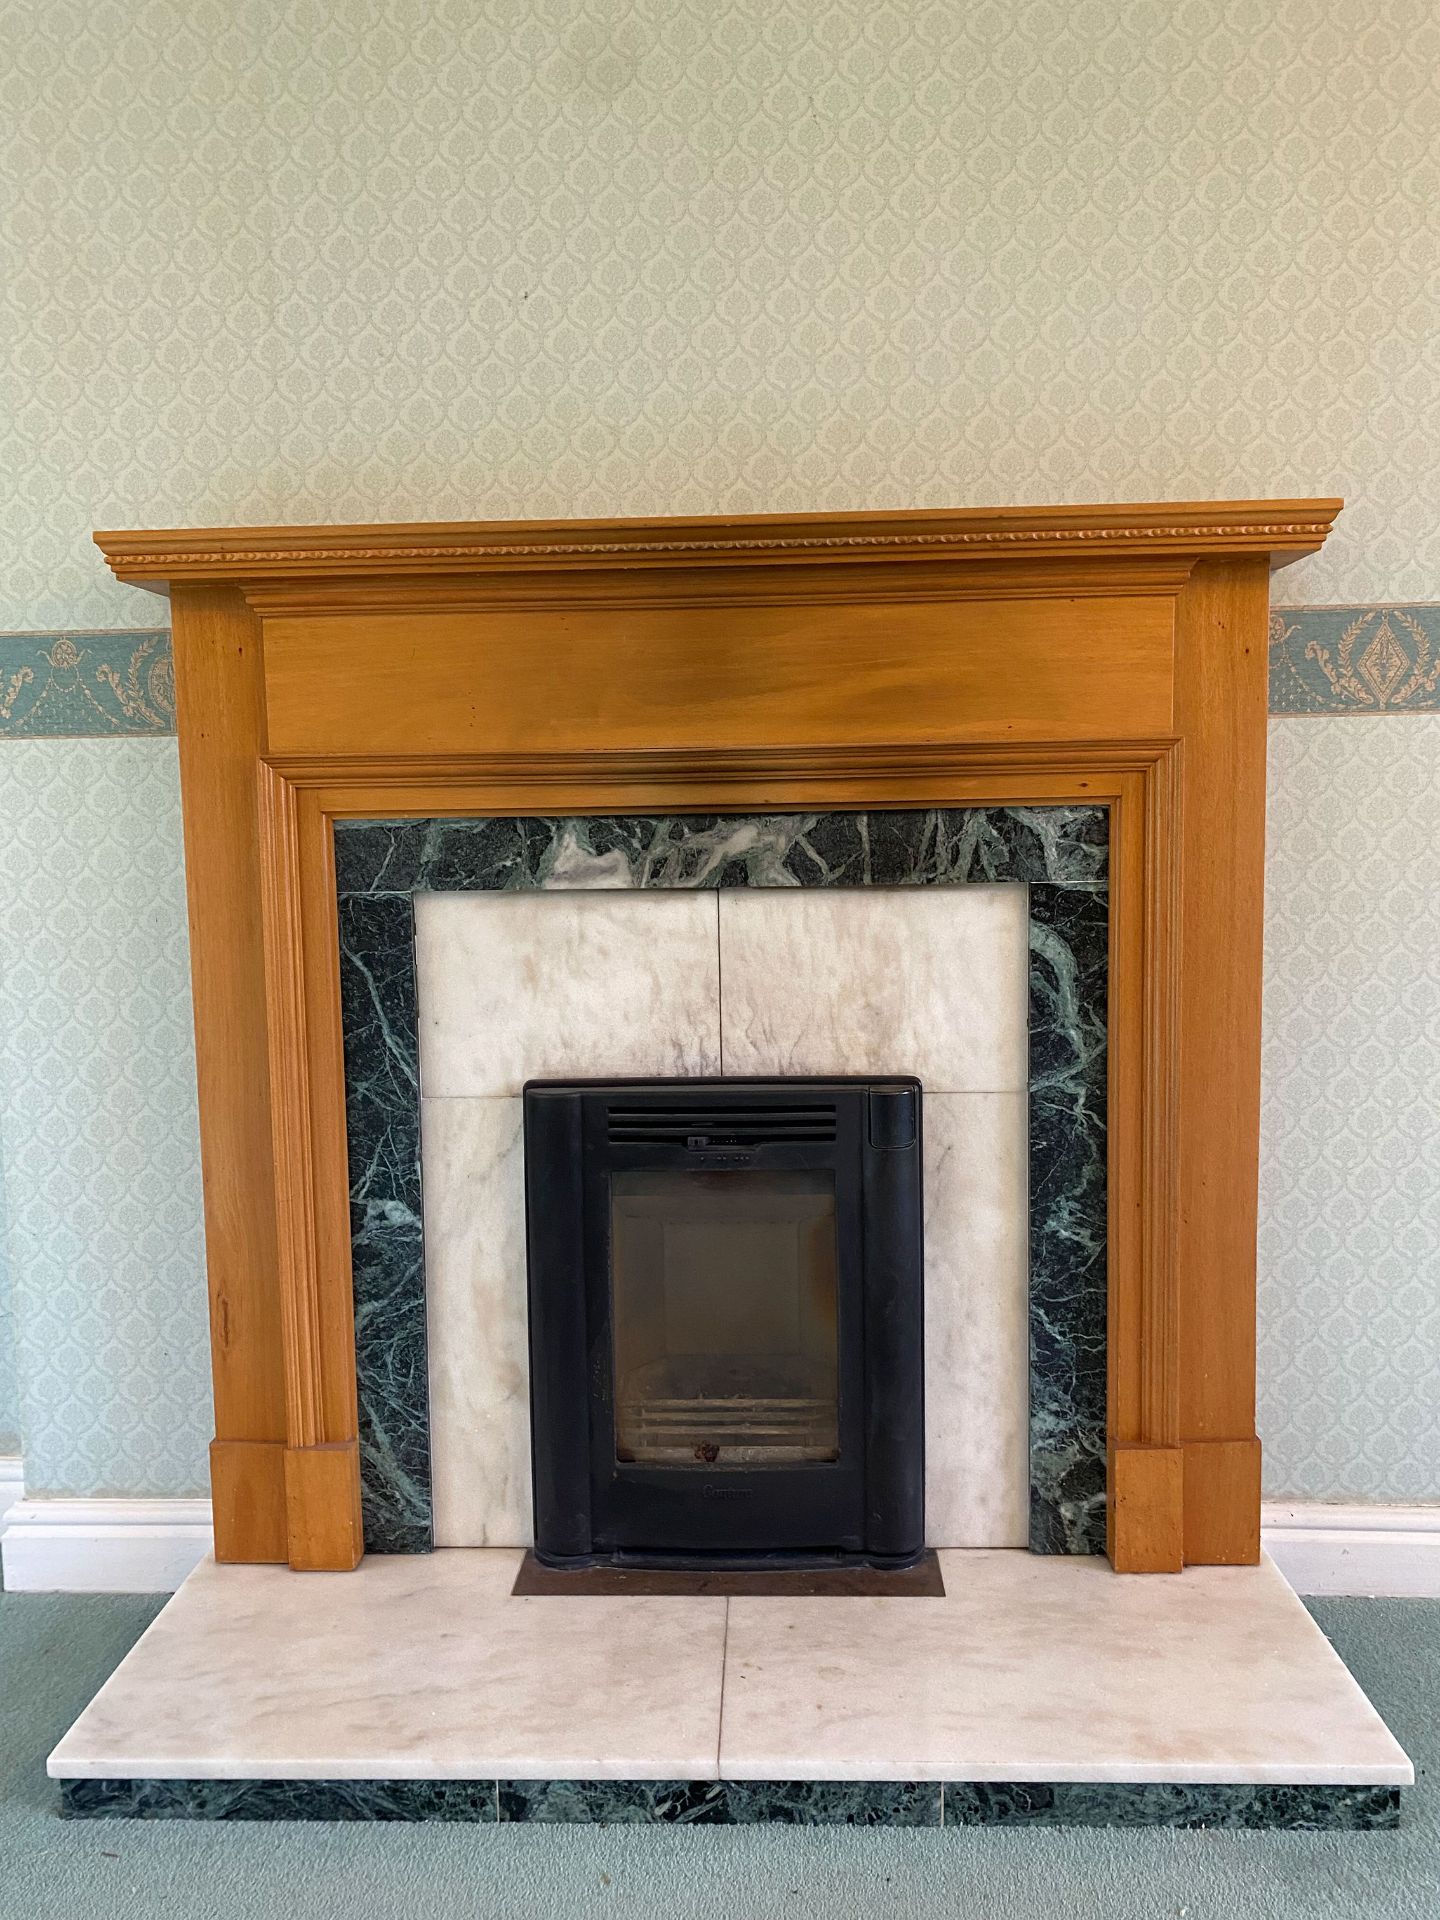 Marble Fireplace with Timber Surround - Image 2 of 4